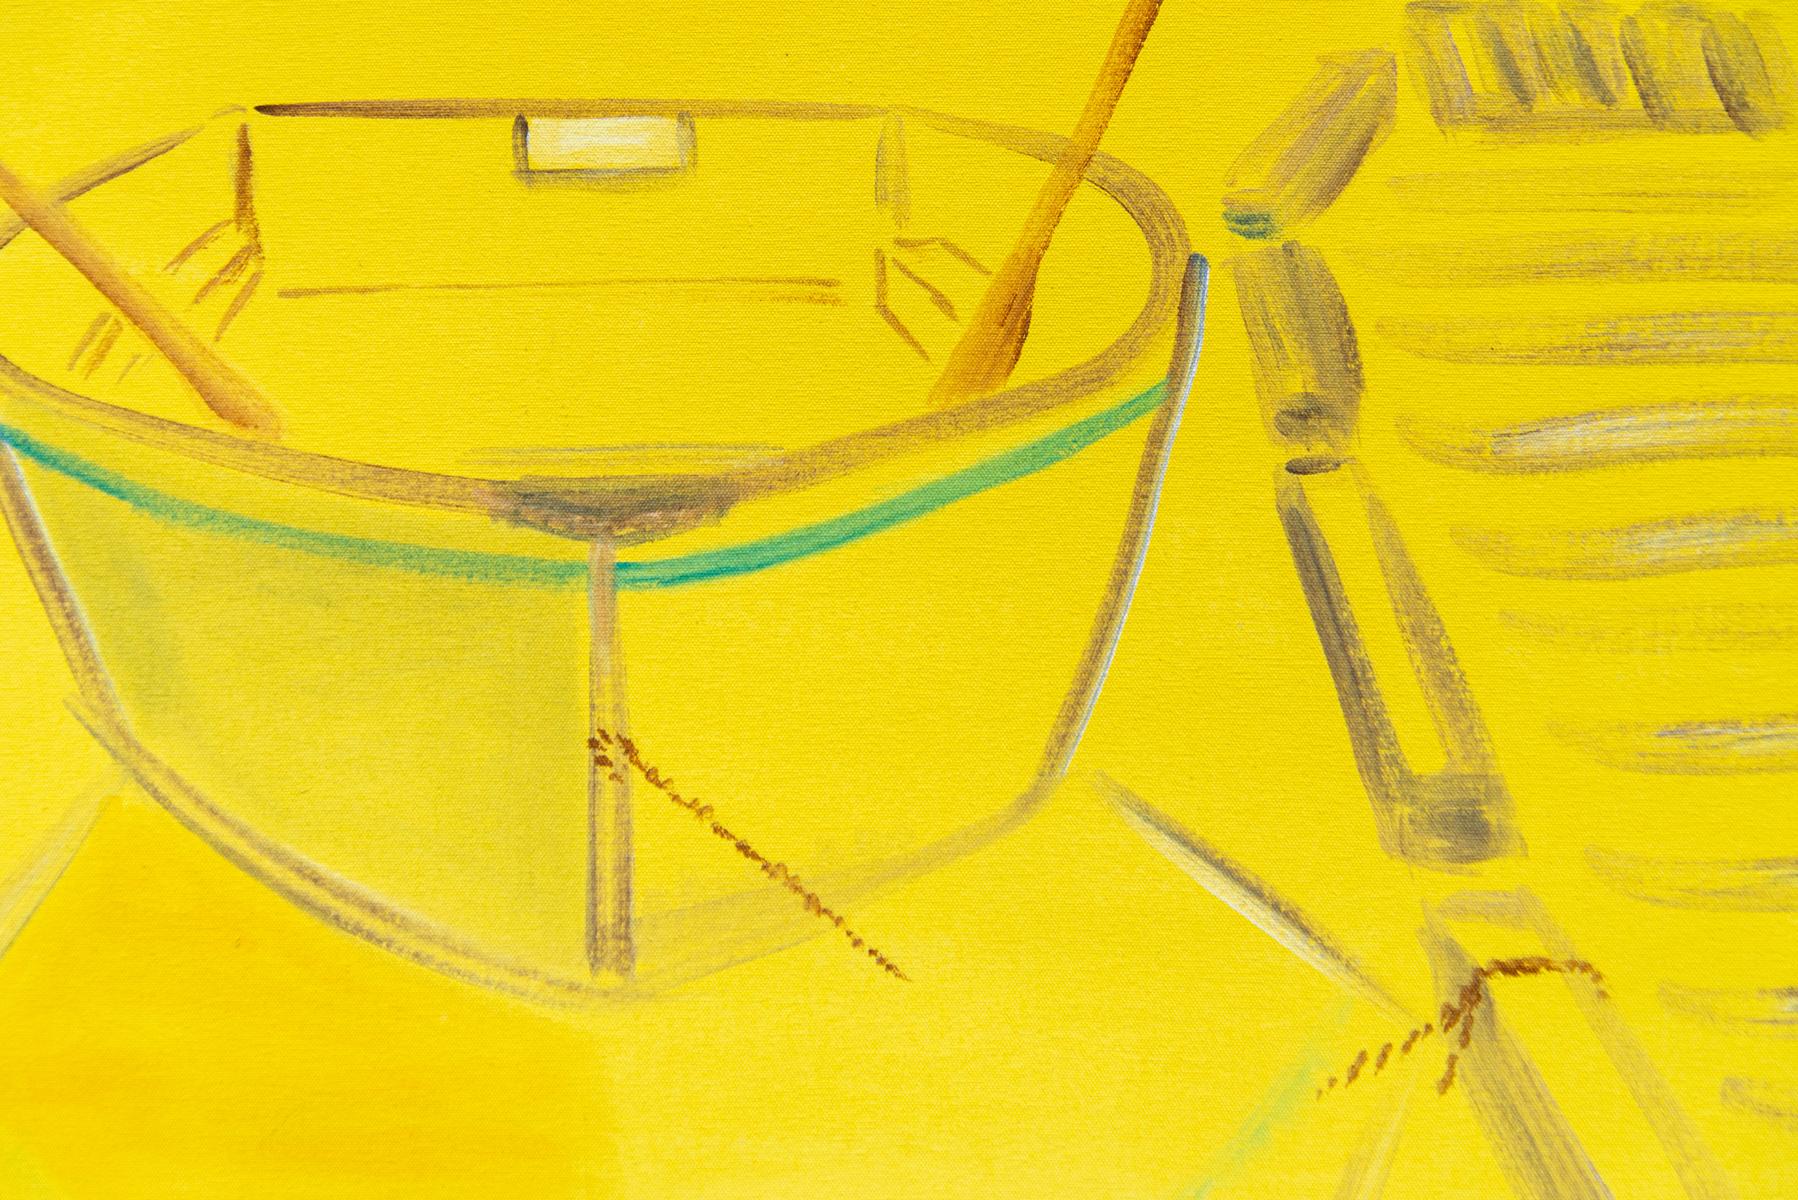 In brilliant yellow, Vancouver artist Pat Service has captured the classic image of a rowboat, moored to a dock. The form is near abstraction as only the outline of the boat in brown is visible. Service uses colour to great effect here with a touch